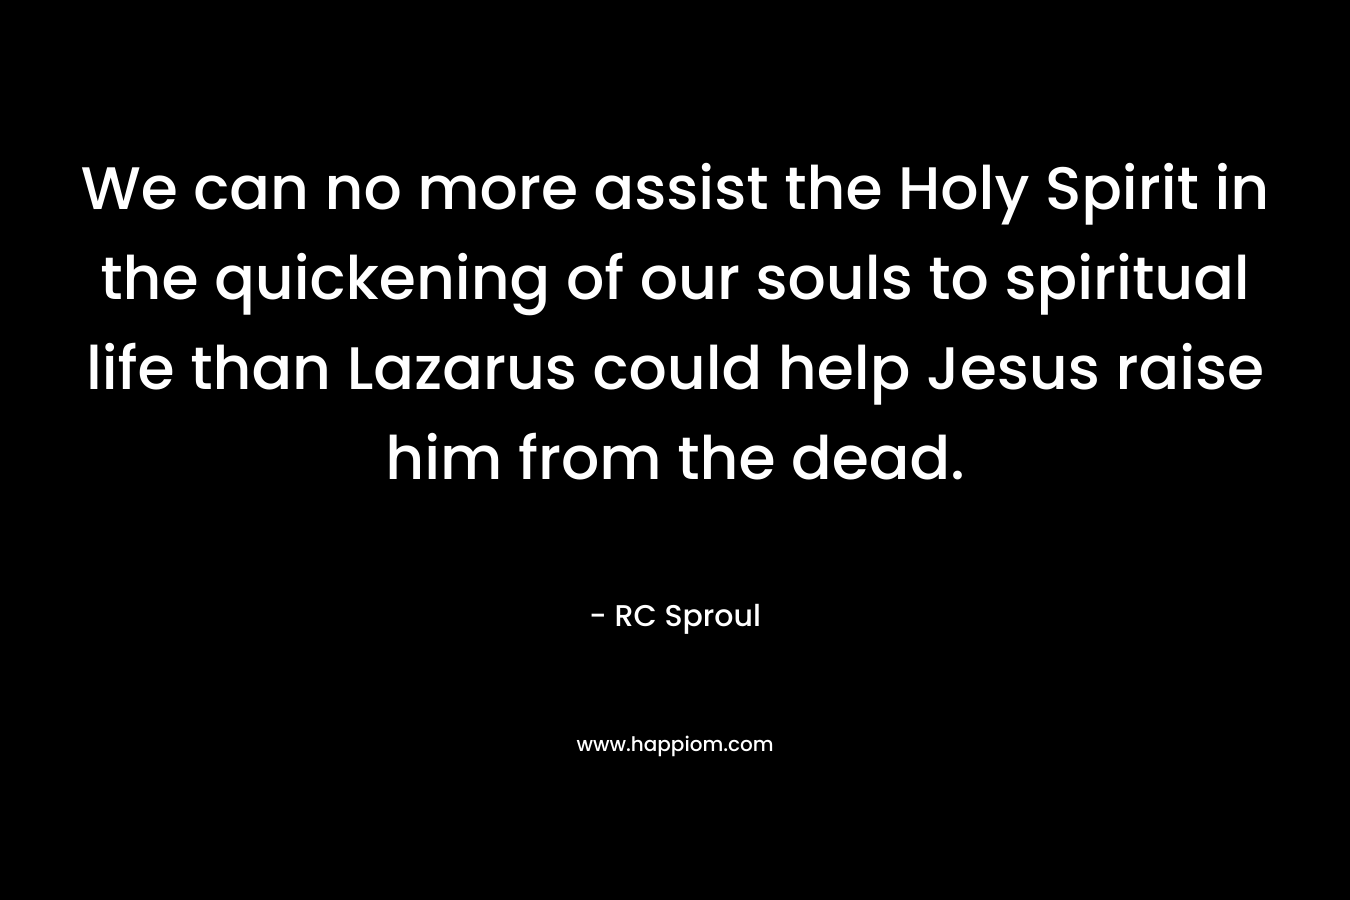 We can no more assist the Holy Spirit in the quickening of our souls to spiritual life than Lazarus could help Jesus raise him from the dead. – RC Sproul